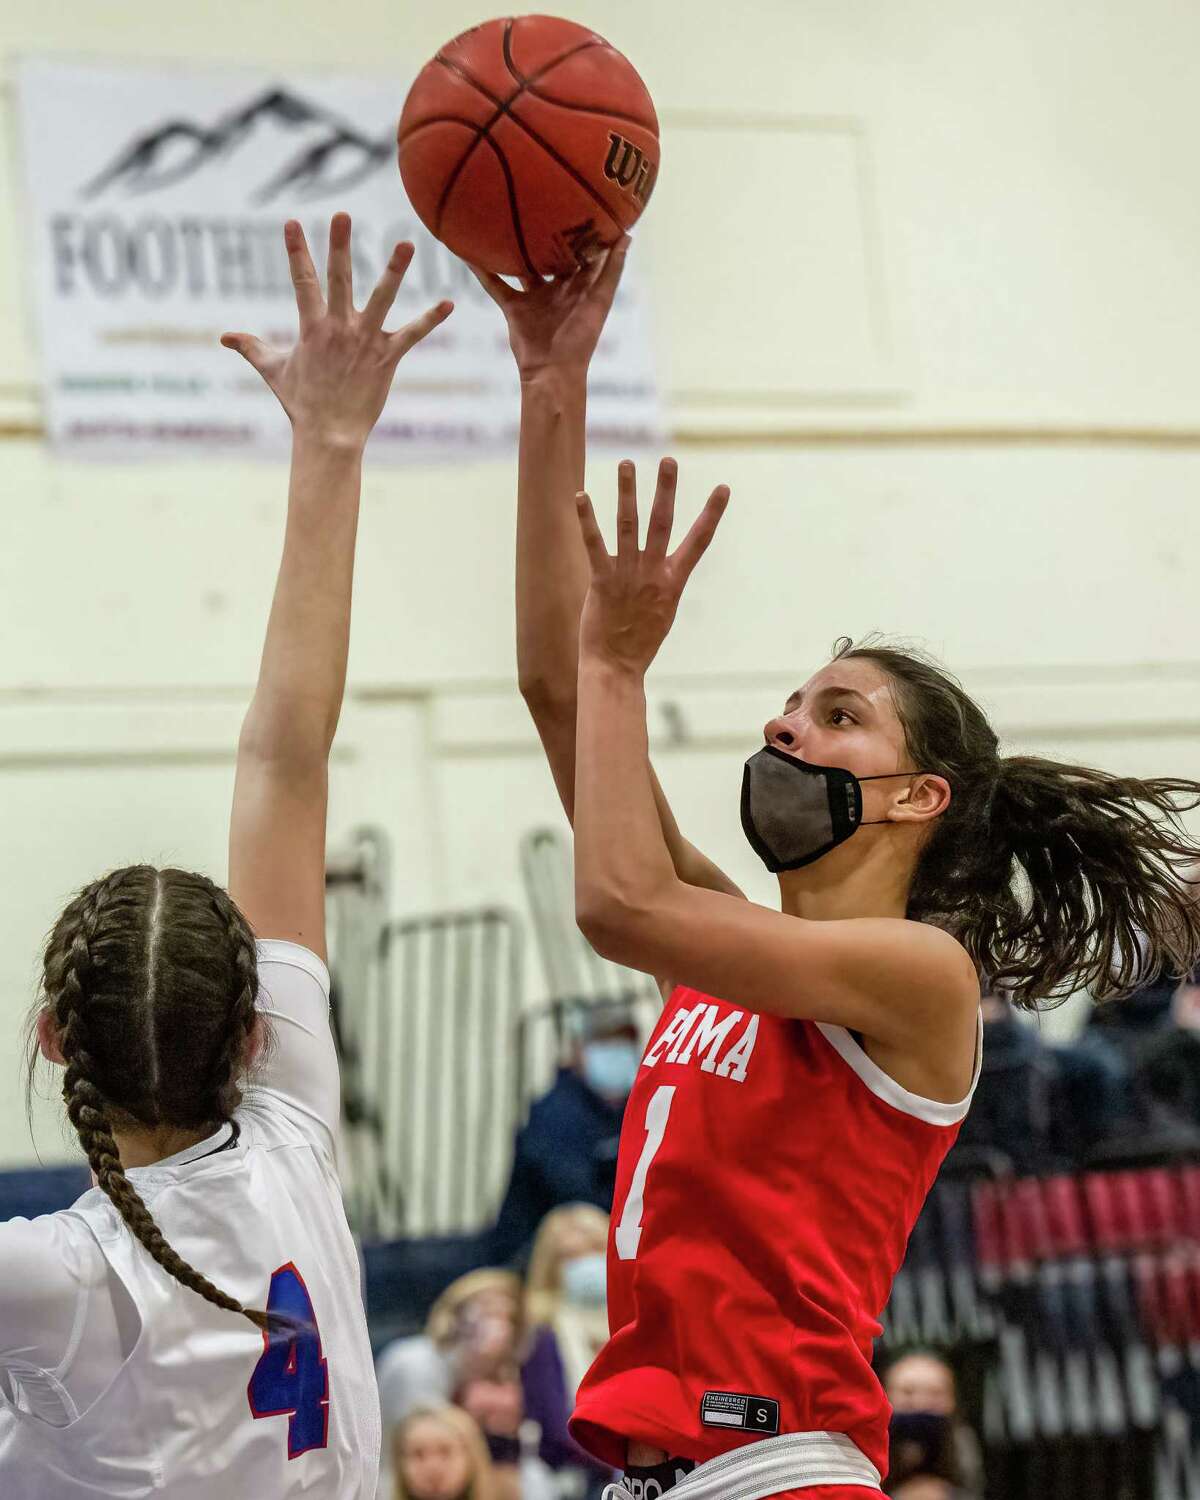 Emma Willard senior Emma Shields takes a jump hook over South Glens Falls junior Kaitlin McDonough during the first round of the Section II, Class A tournament at South Glens Falls High School on Friday, Feb. 18, 2022. (Jim Franco/Special to the Times Union)